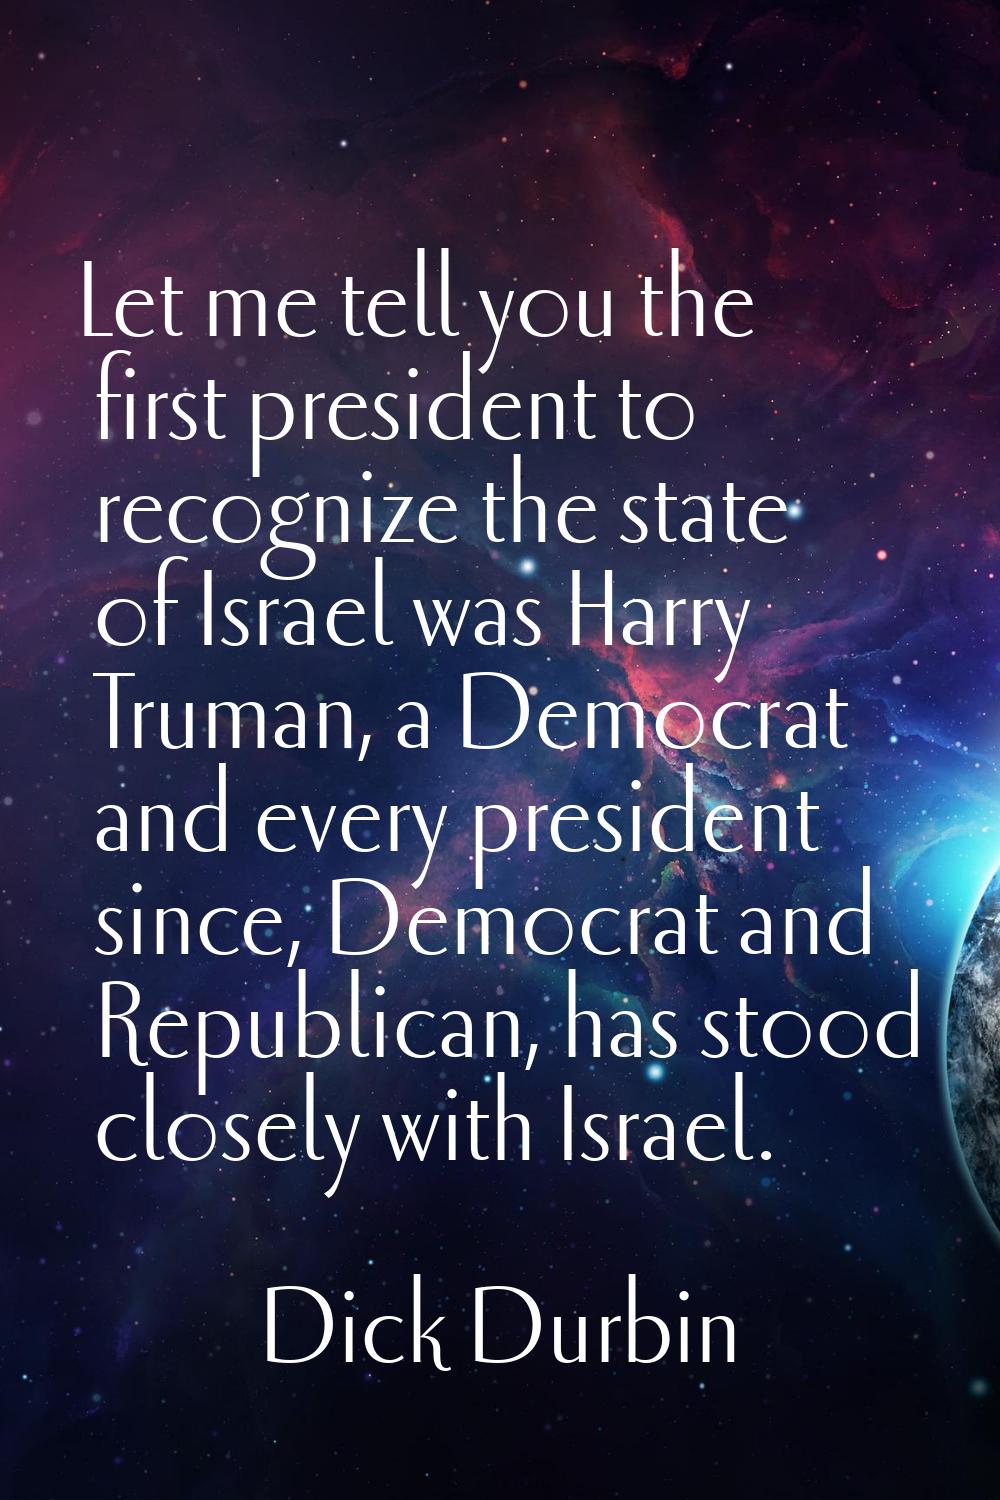 Let me tell you the first president to recognize the state of Israel was Harry Truman, a Democrat a